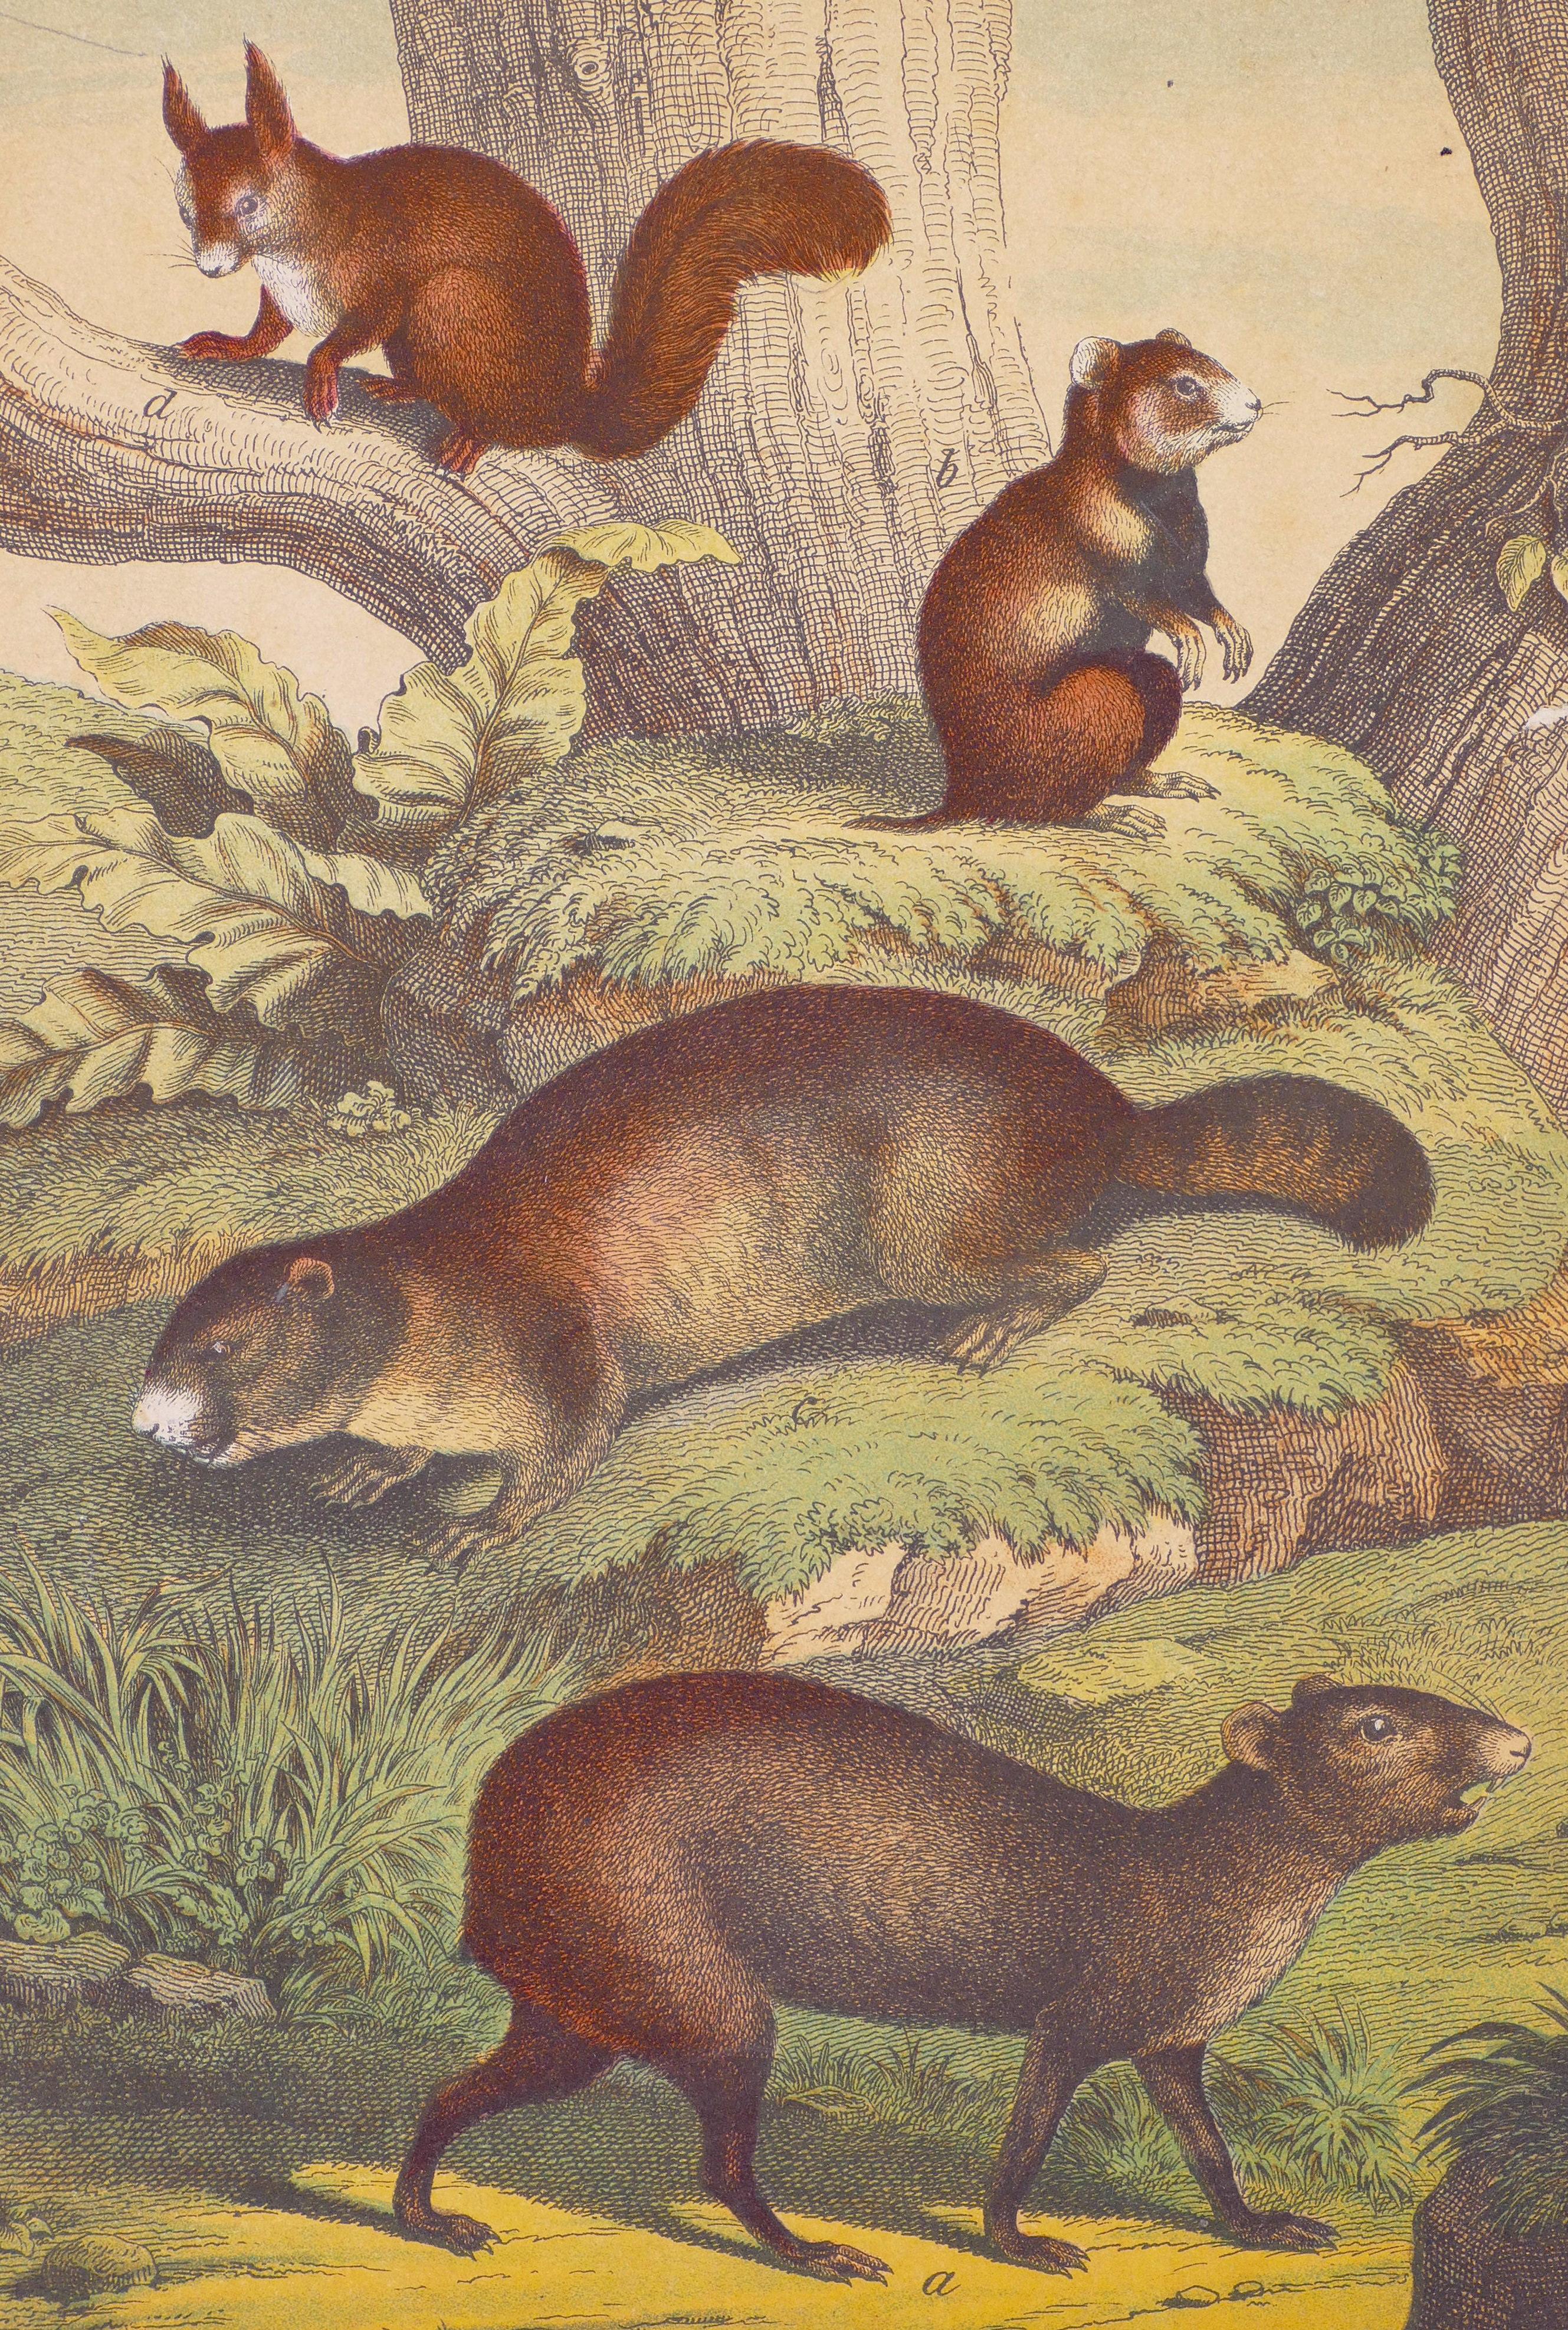 Squirrels - Original Lithograph - Late 19th Century - Print by Unknown